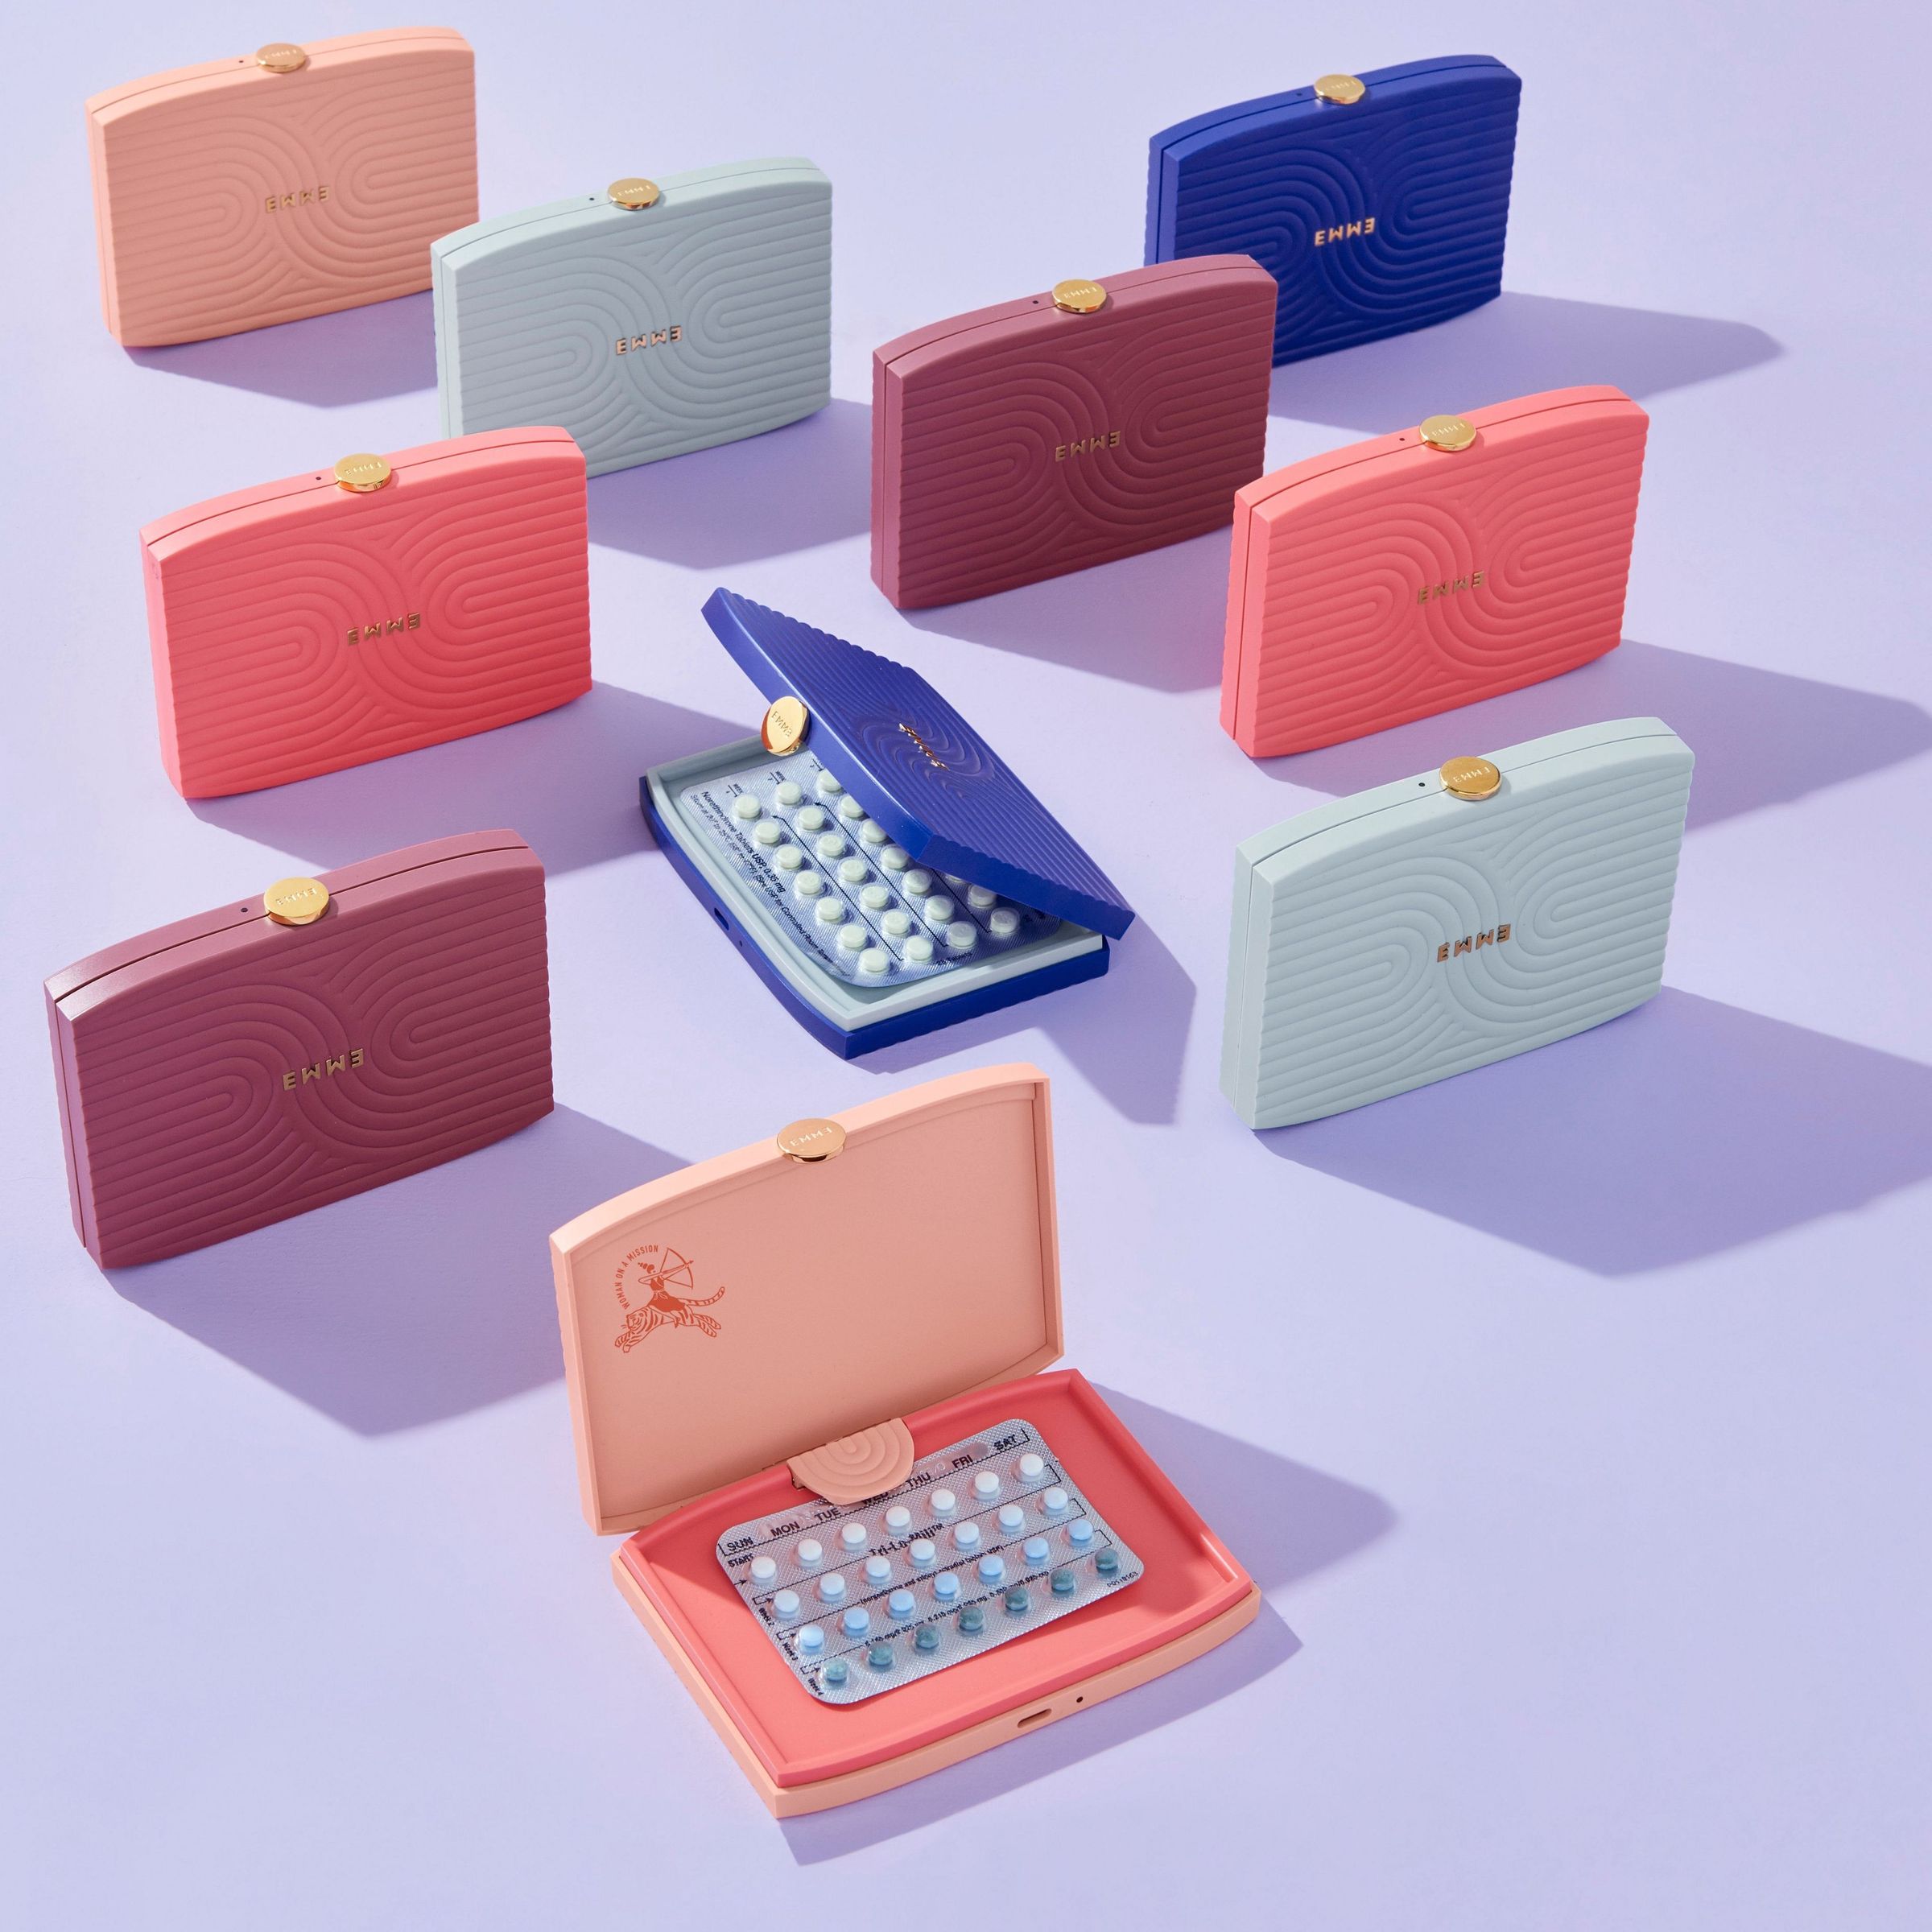 Emme Is Bringing the Pill Experience Into the 21st Century